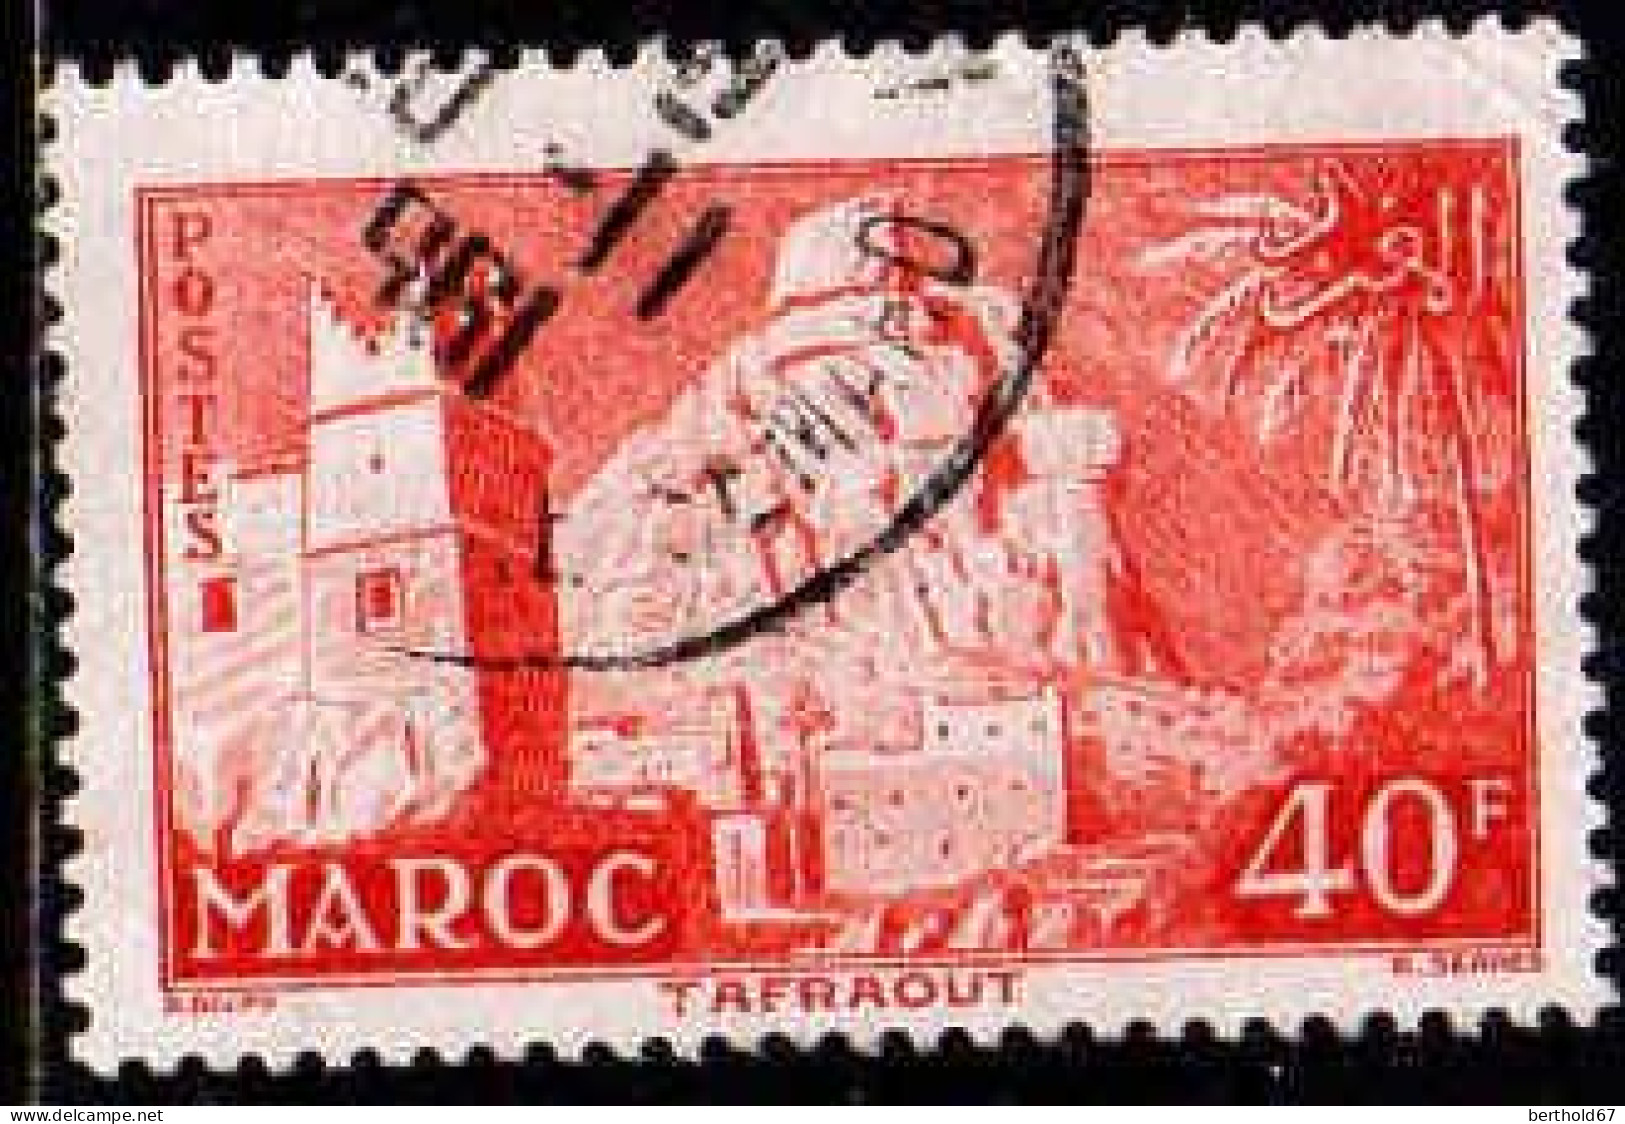 Maroc (Prot.Fr) Poste Obl Yv:359 Mi:402 Tafraout (Beau Cachet Rond) - Used Stamps